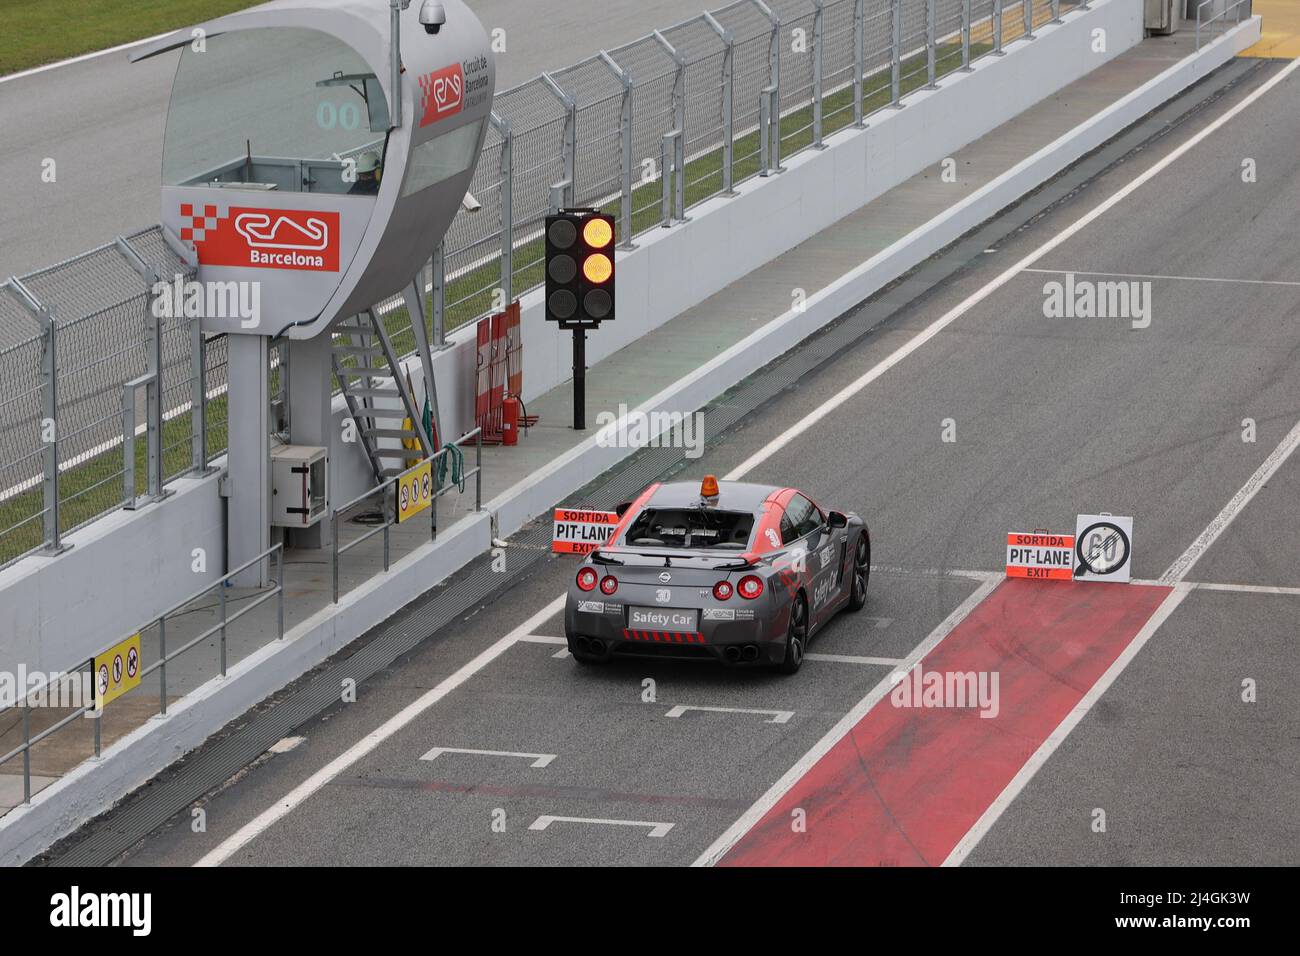 Nissan GT-R safety car waiting in pit lane at Circuit of Catalonia, Barcelona, Spain Stock Photo